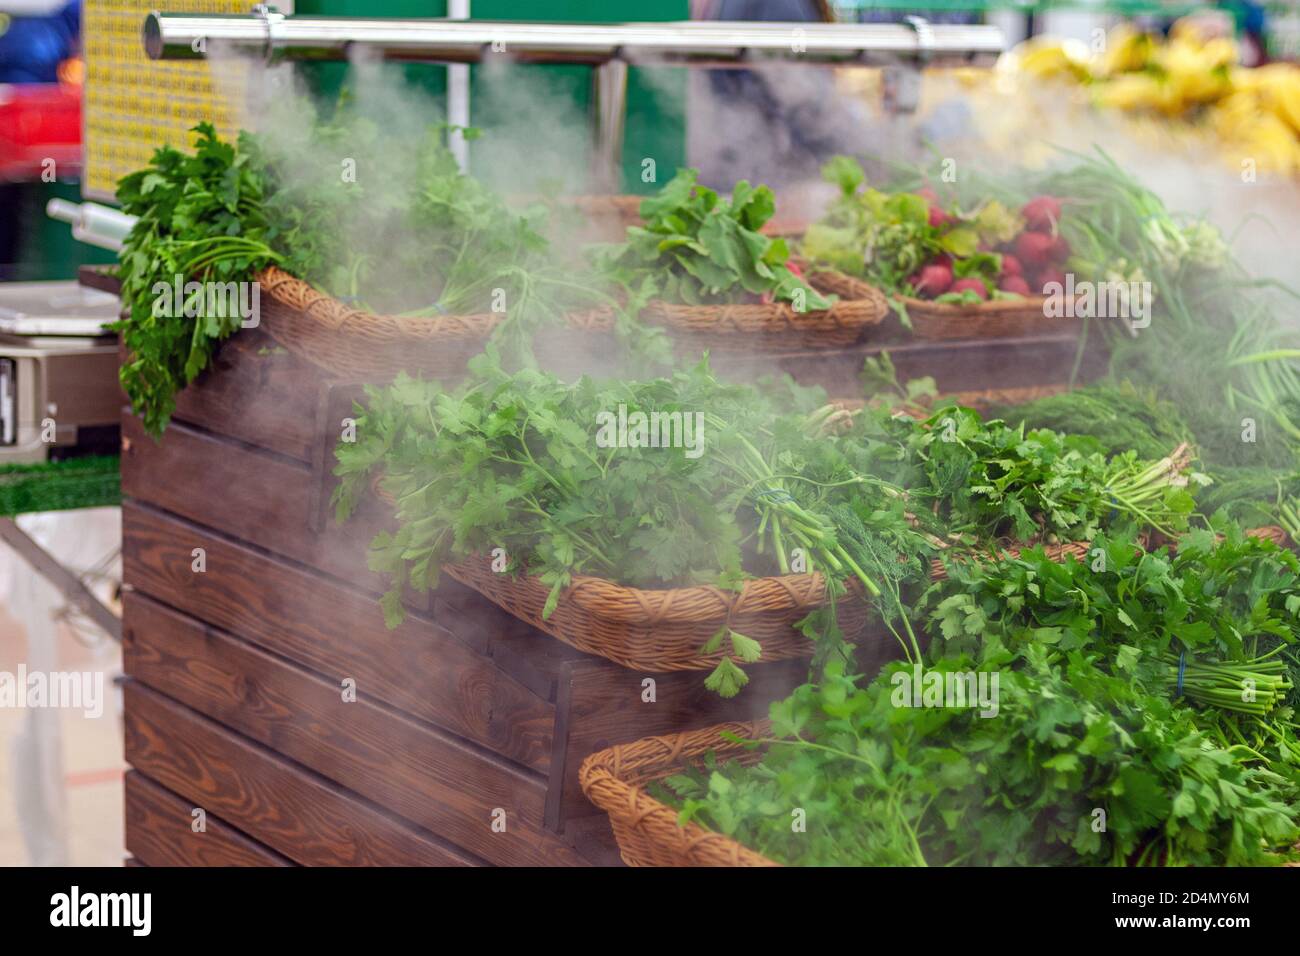 humidification of greens and vegetables in grocery store Stock Photo